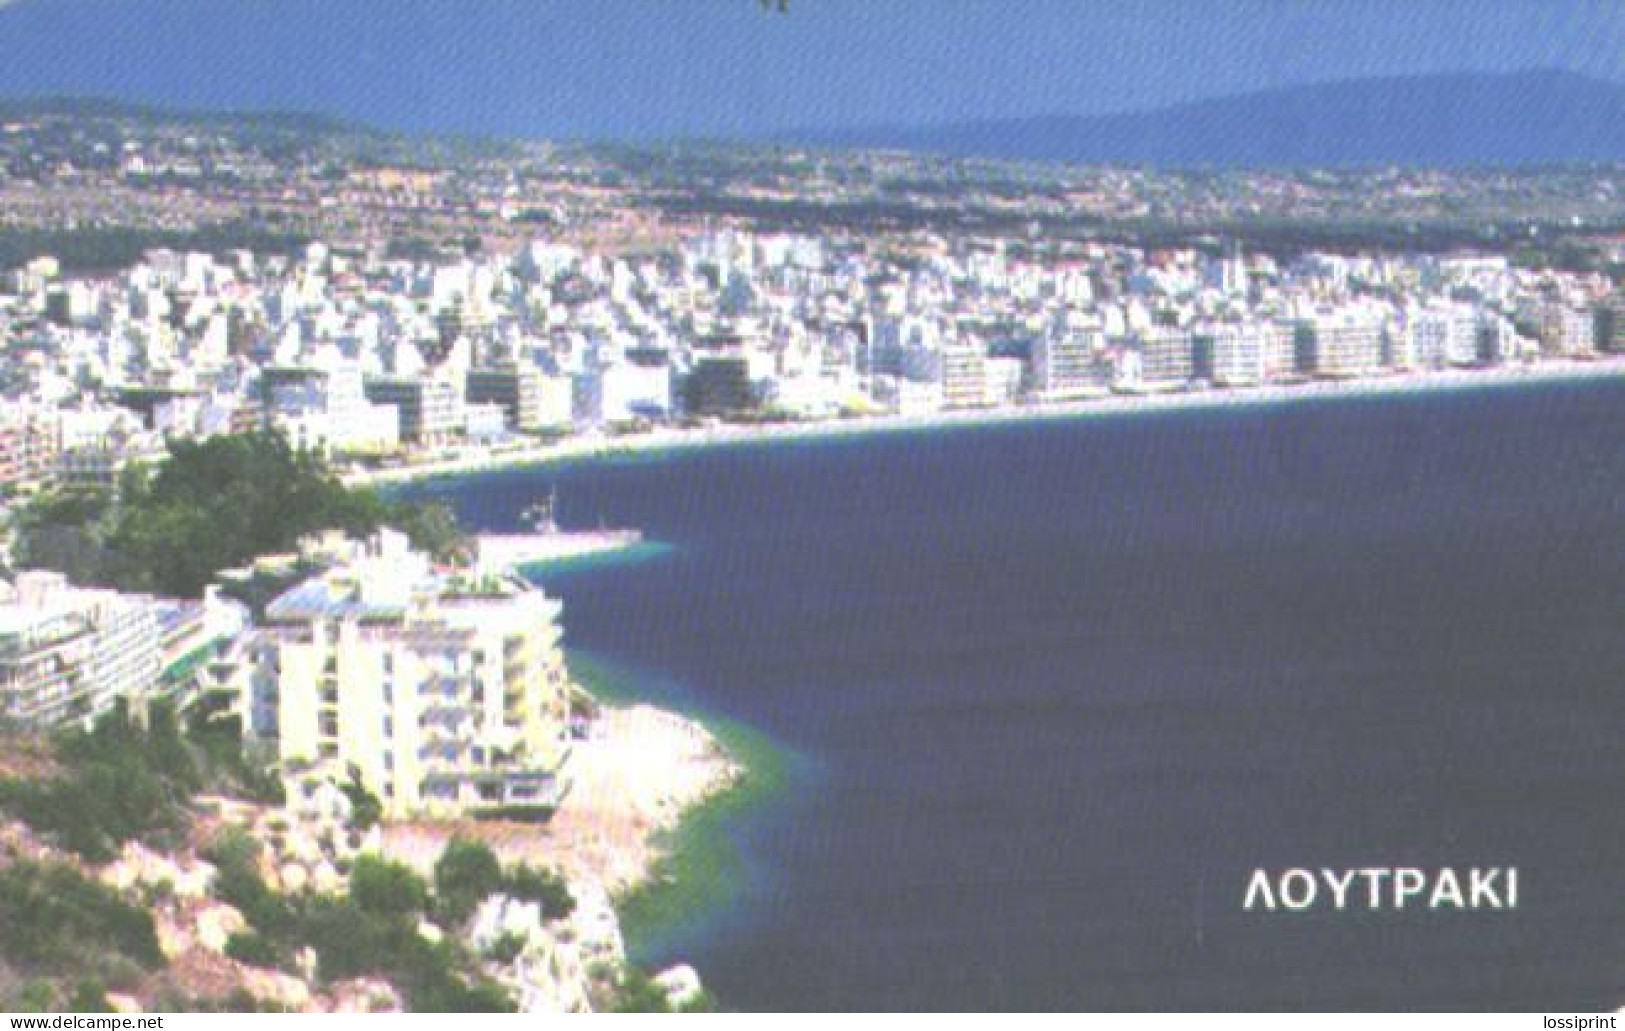 Greece:Used Phonecard, OTE, 100 Units, Hpaioy Lighthouse, Loytpaki Aerial View, 1996 - Fari